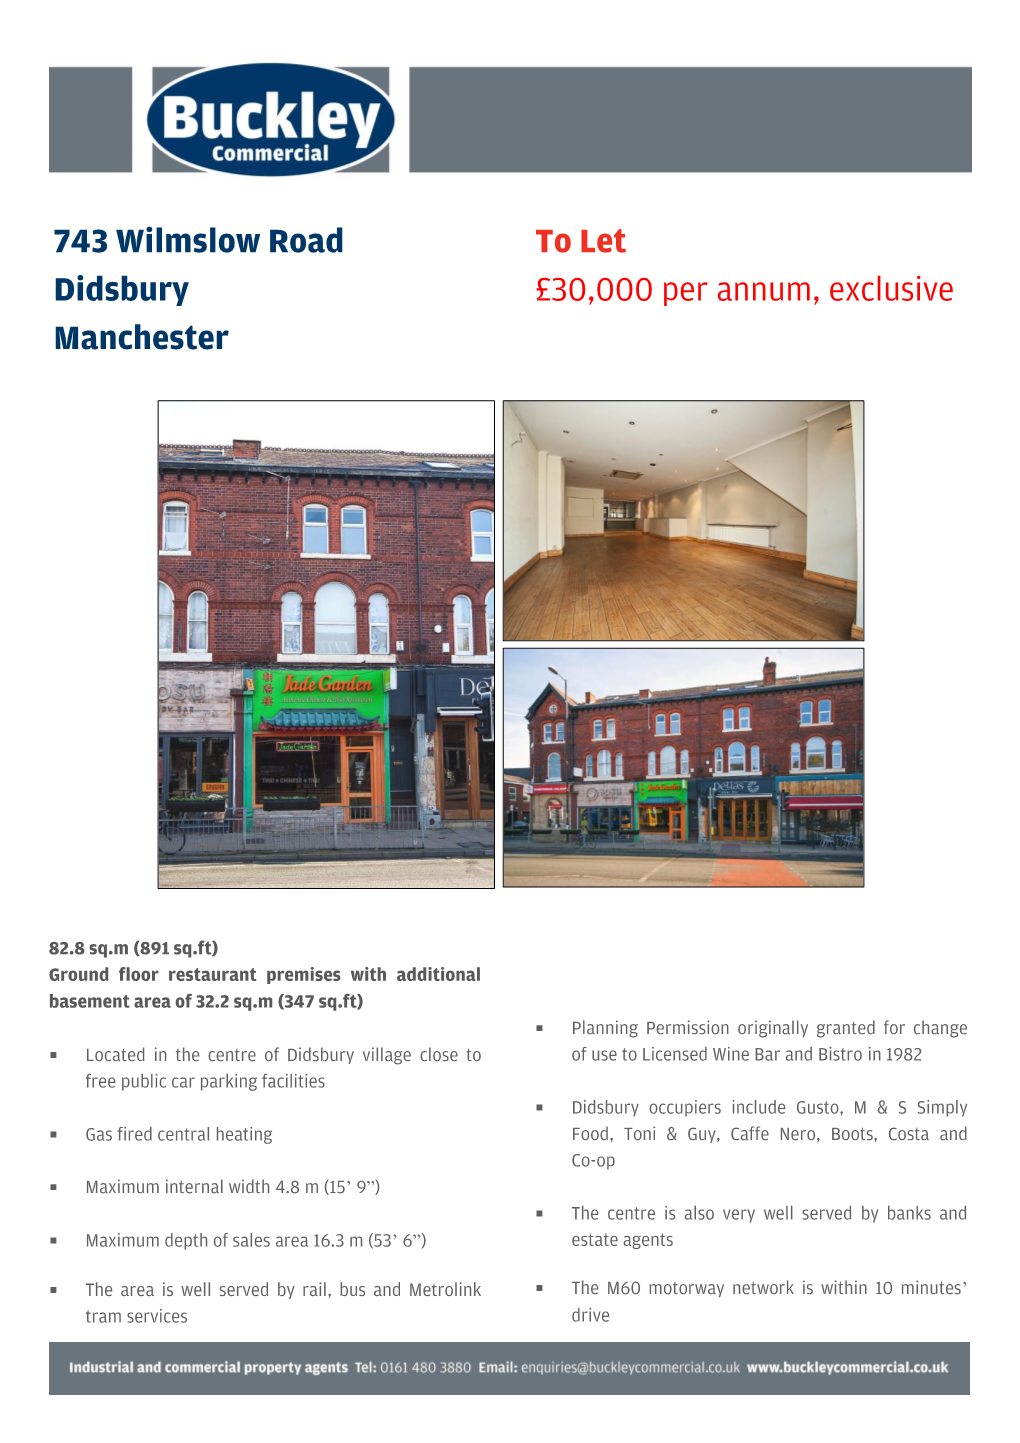 743 Wilmslow Road Didsbury Manchester to Let £30,000 Per